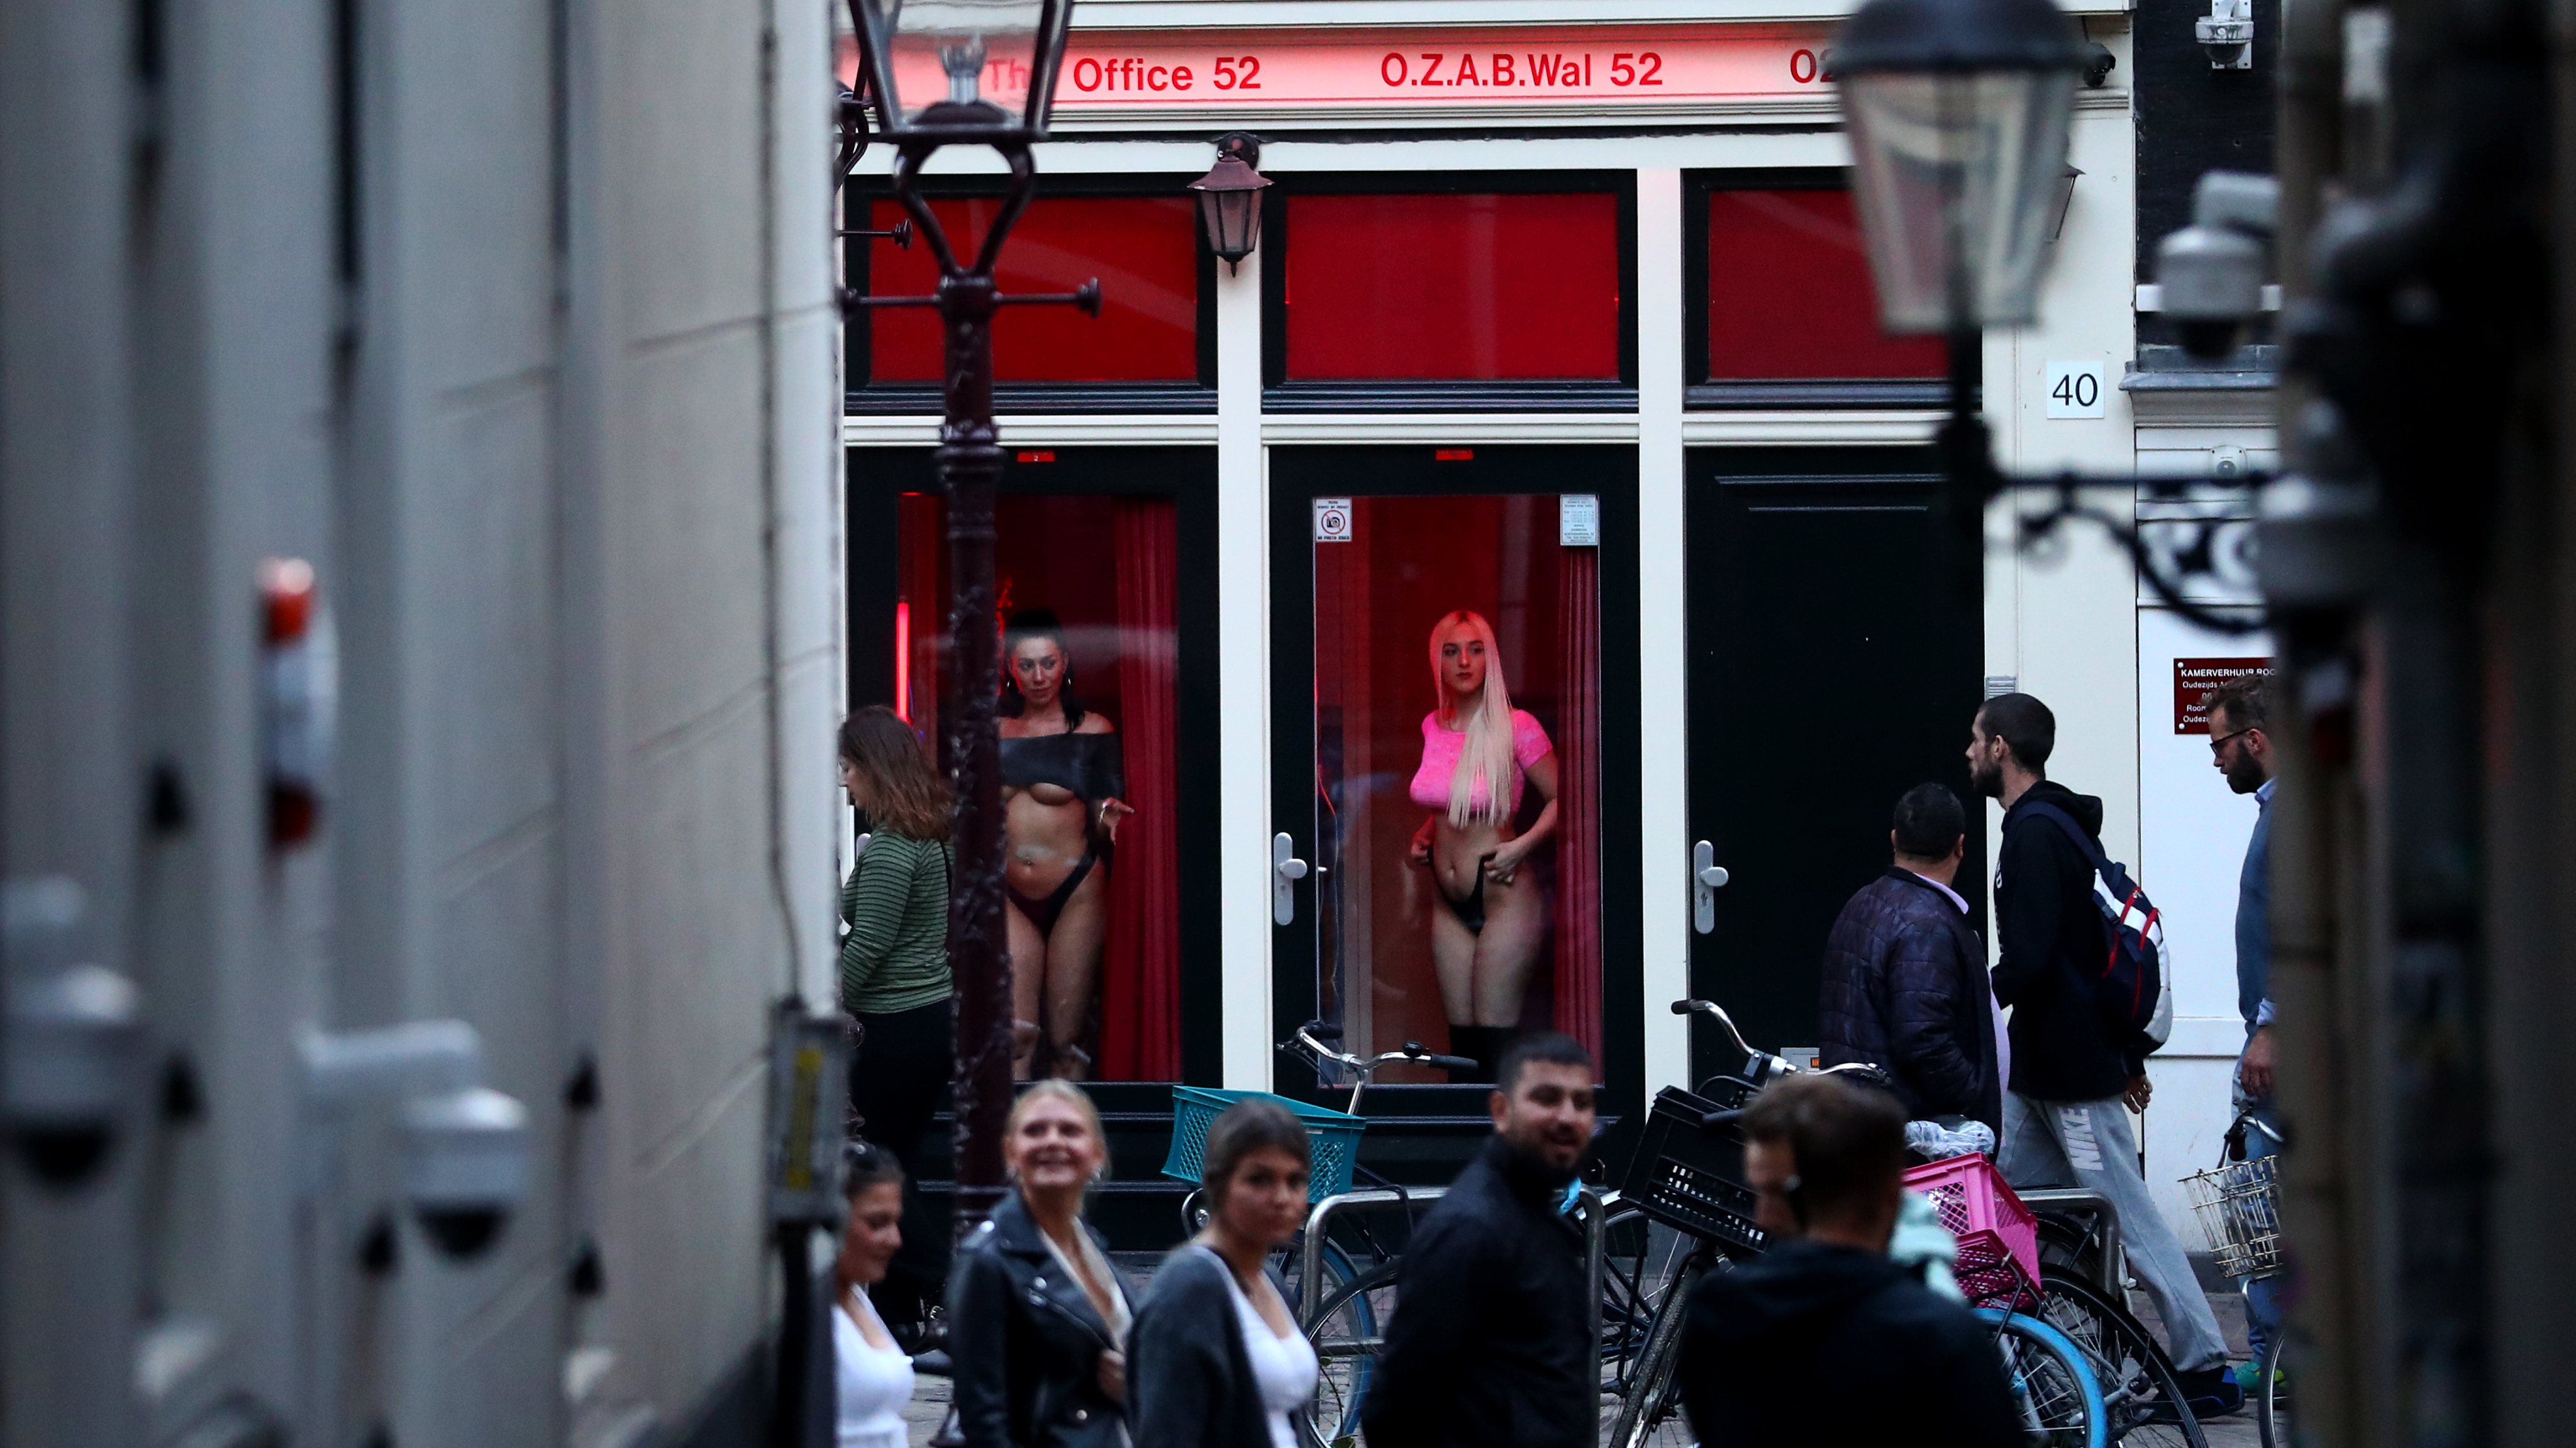 Where is the red light district in washington dc?